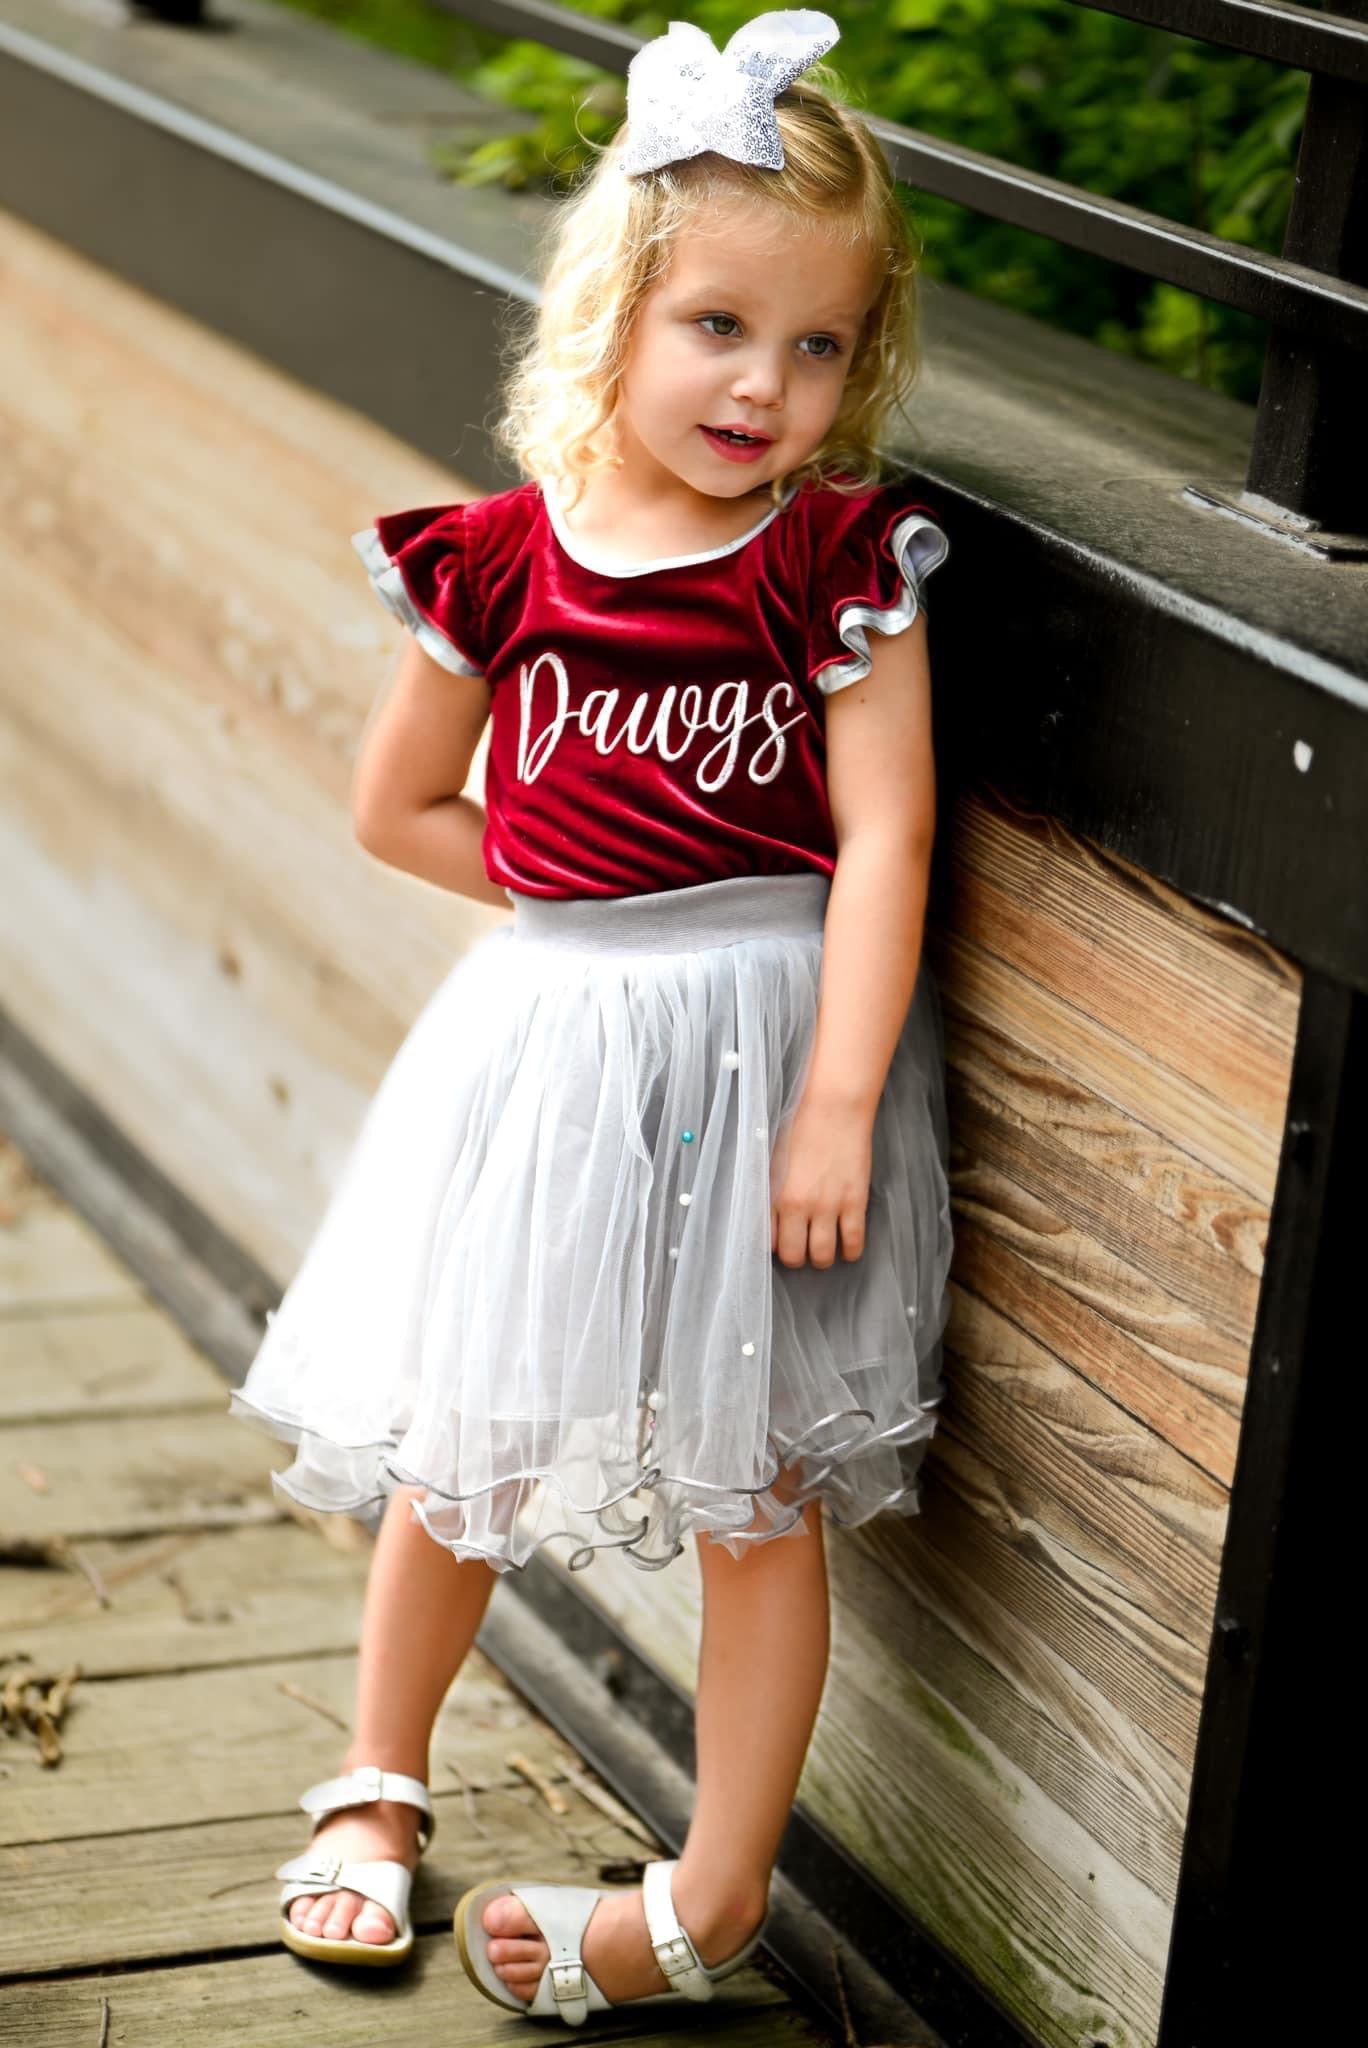 Go Dawgs Maroon and Silver Embroidered Velvet Shirt - Evie's Closet Clothing